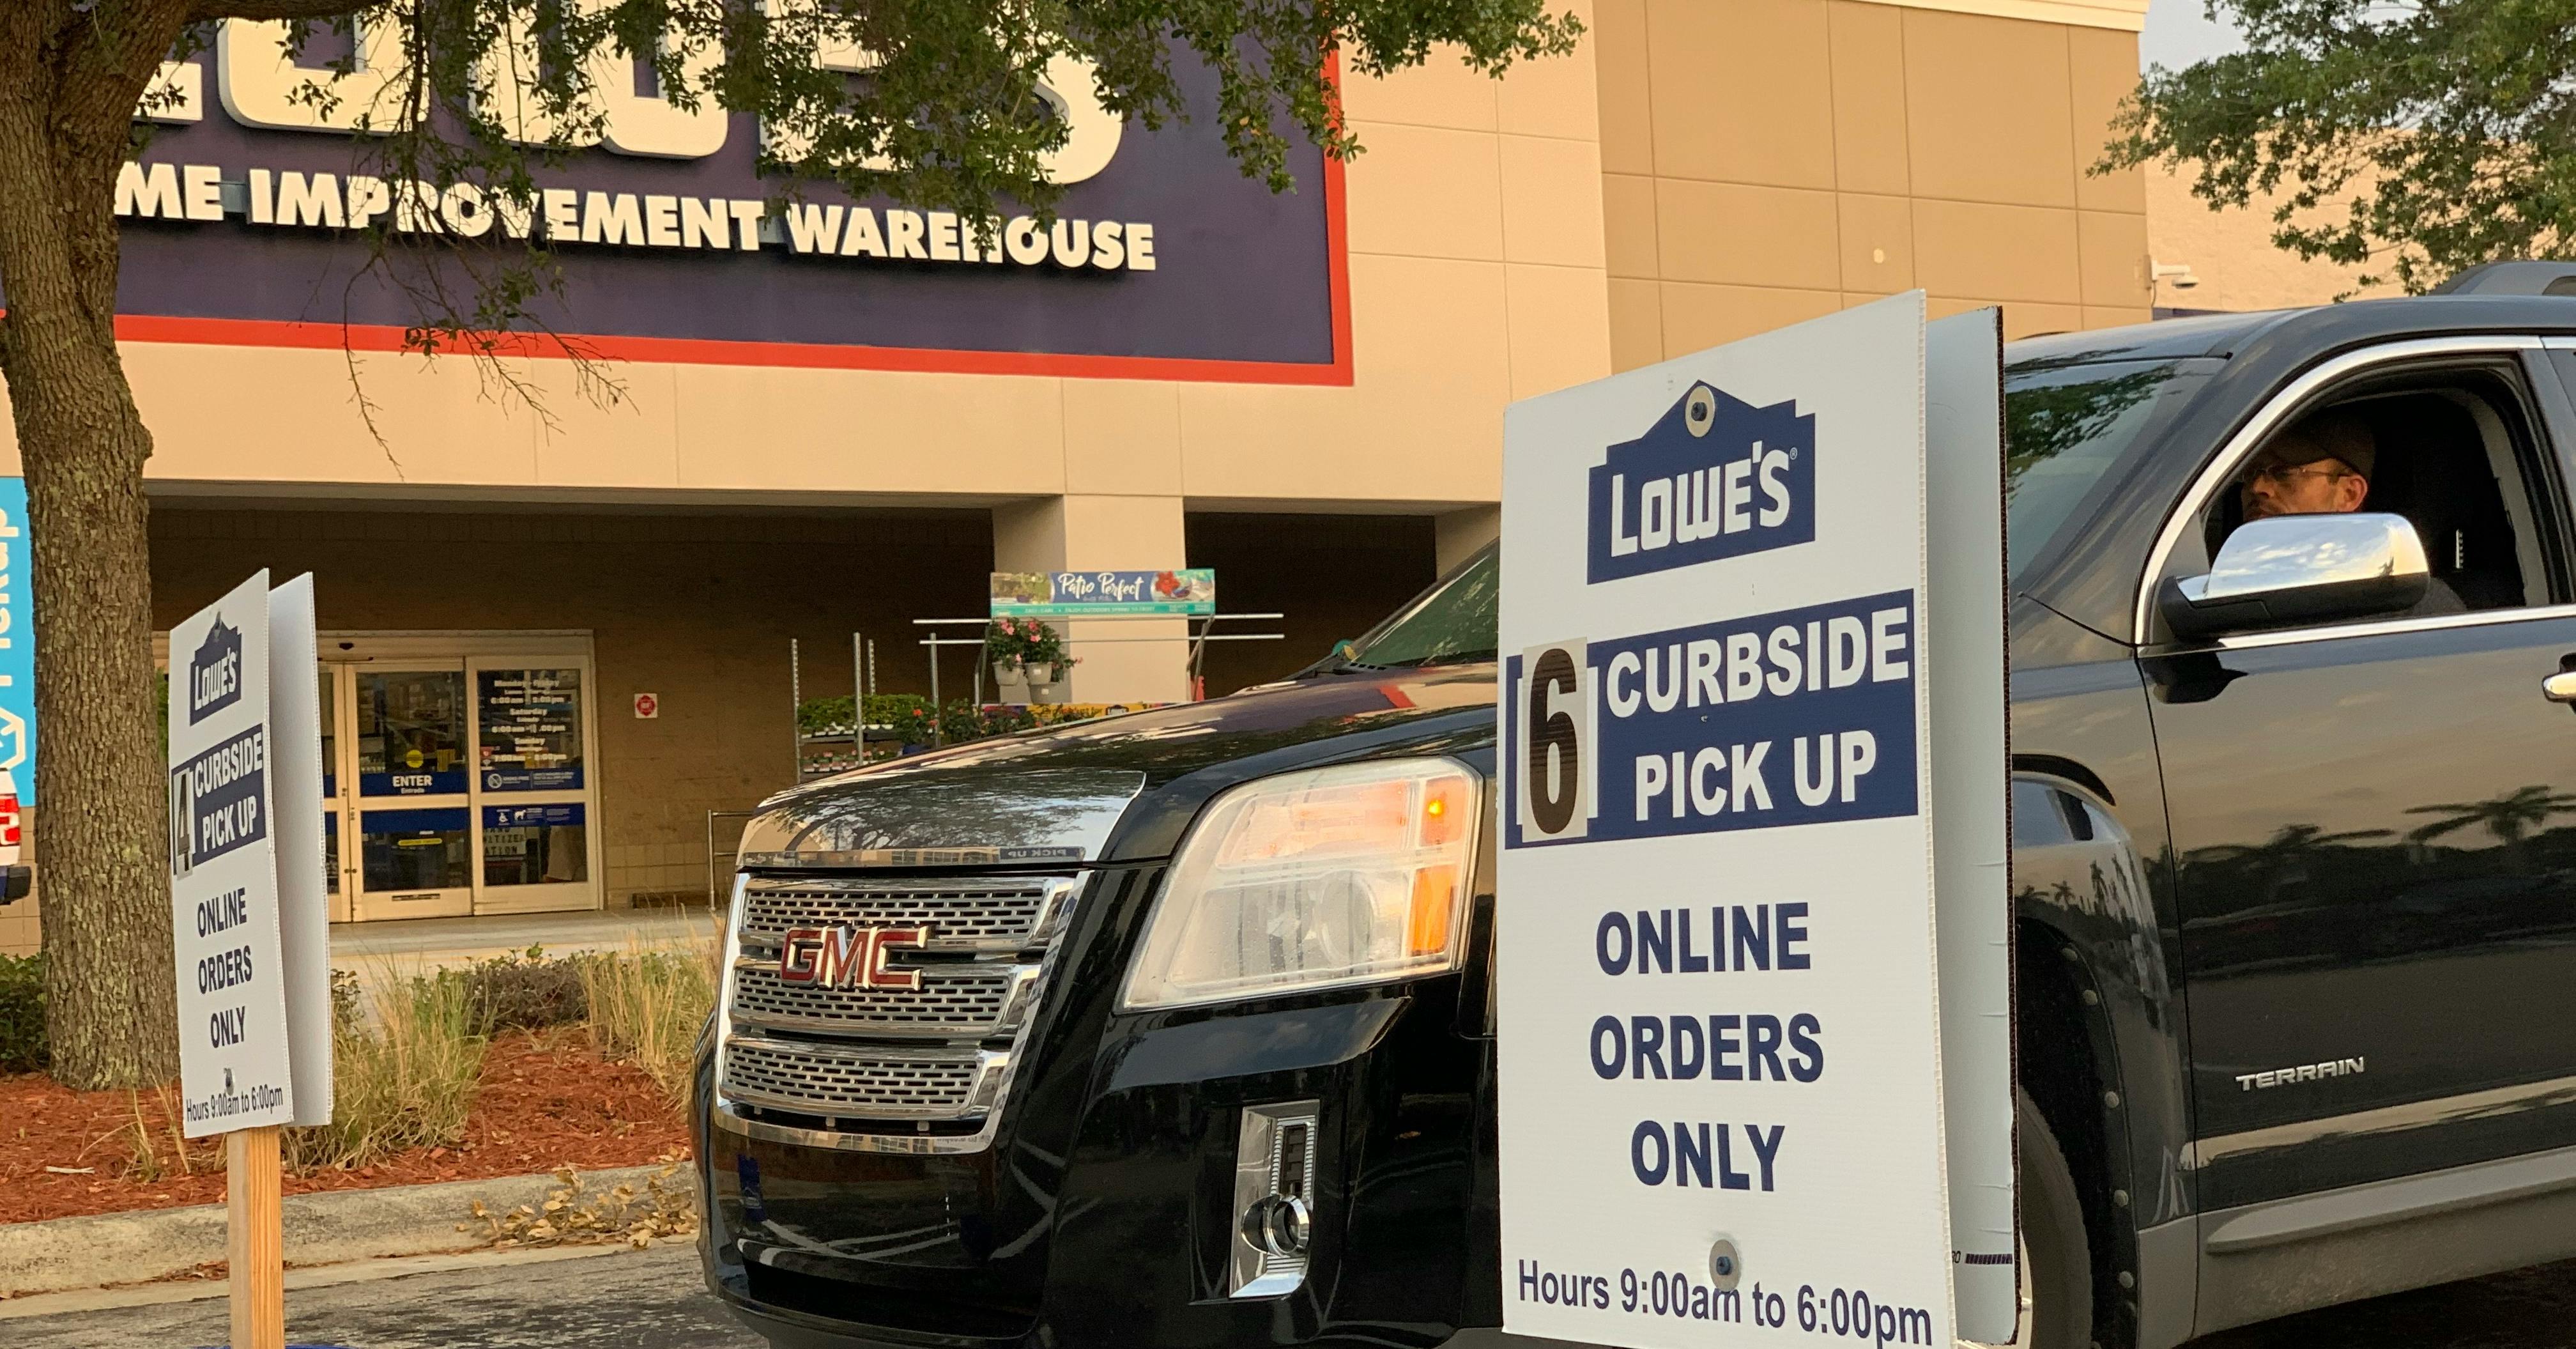 Lowe's Curbside Pickup: All You Need in 4 Easy Steps - The Krazy Coupon